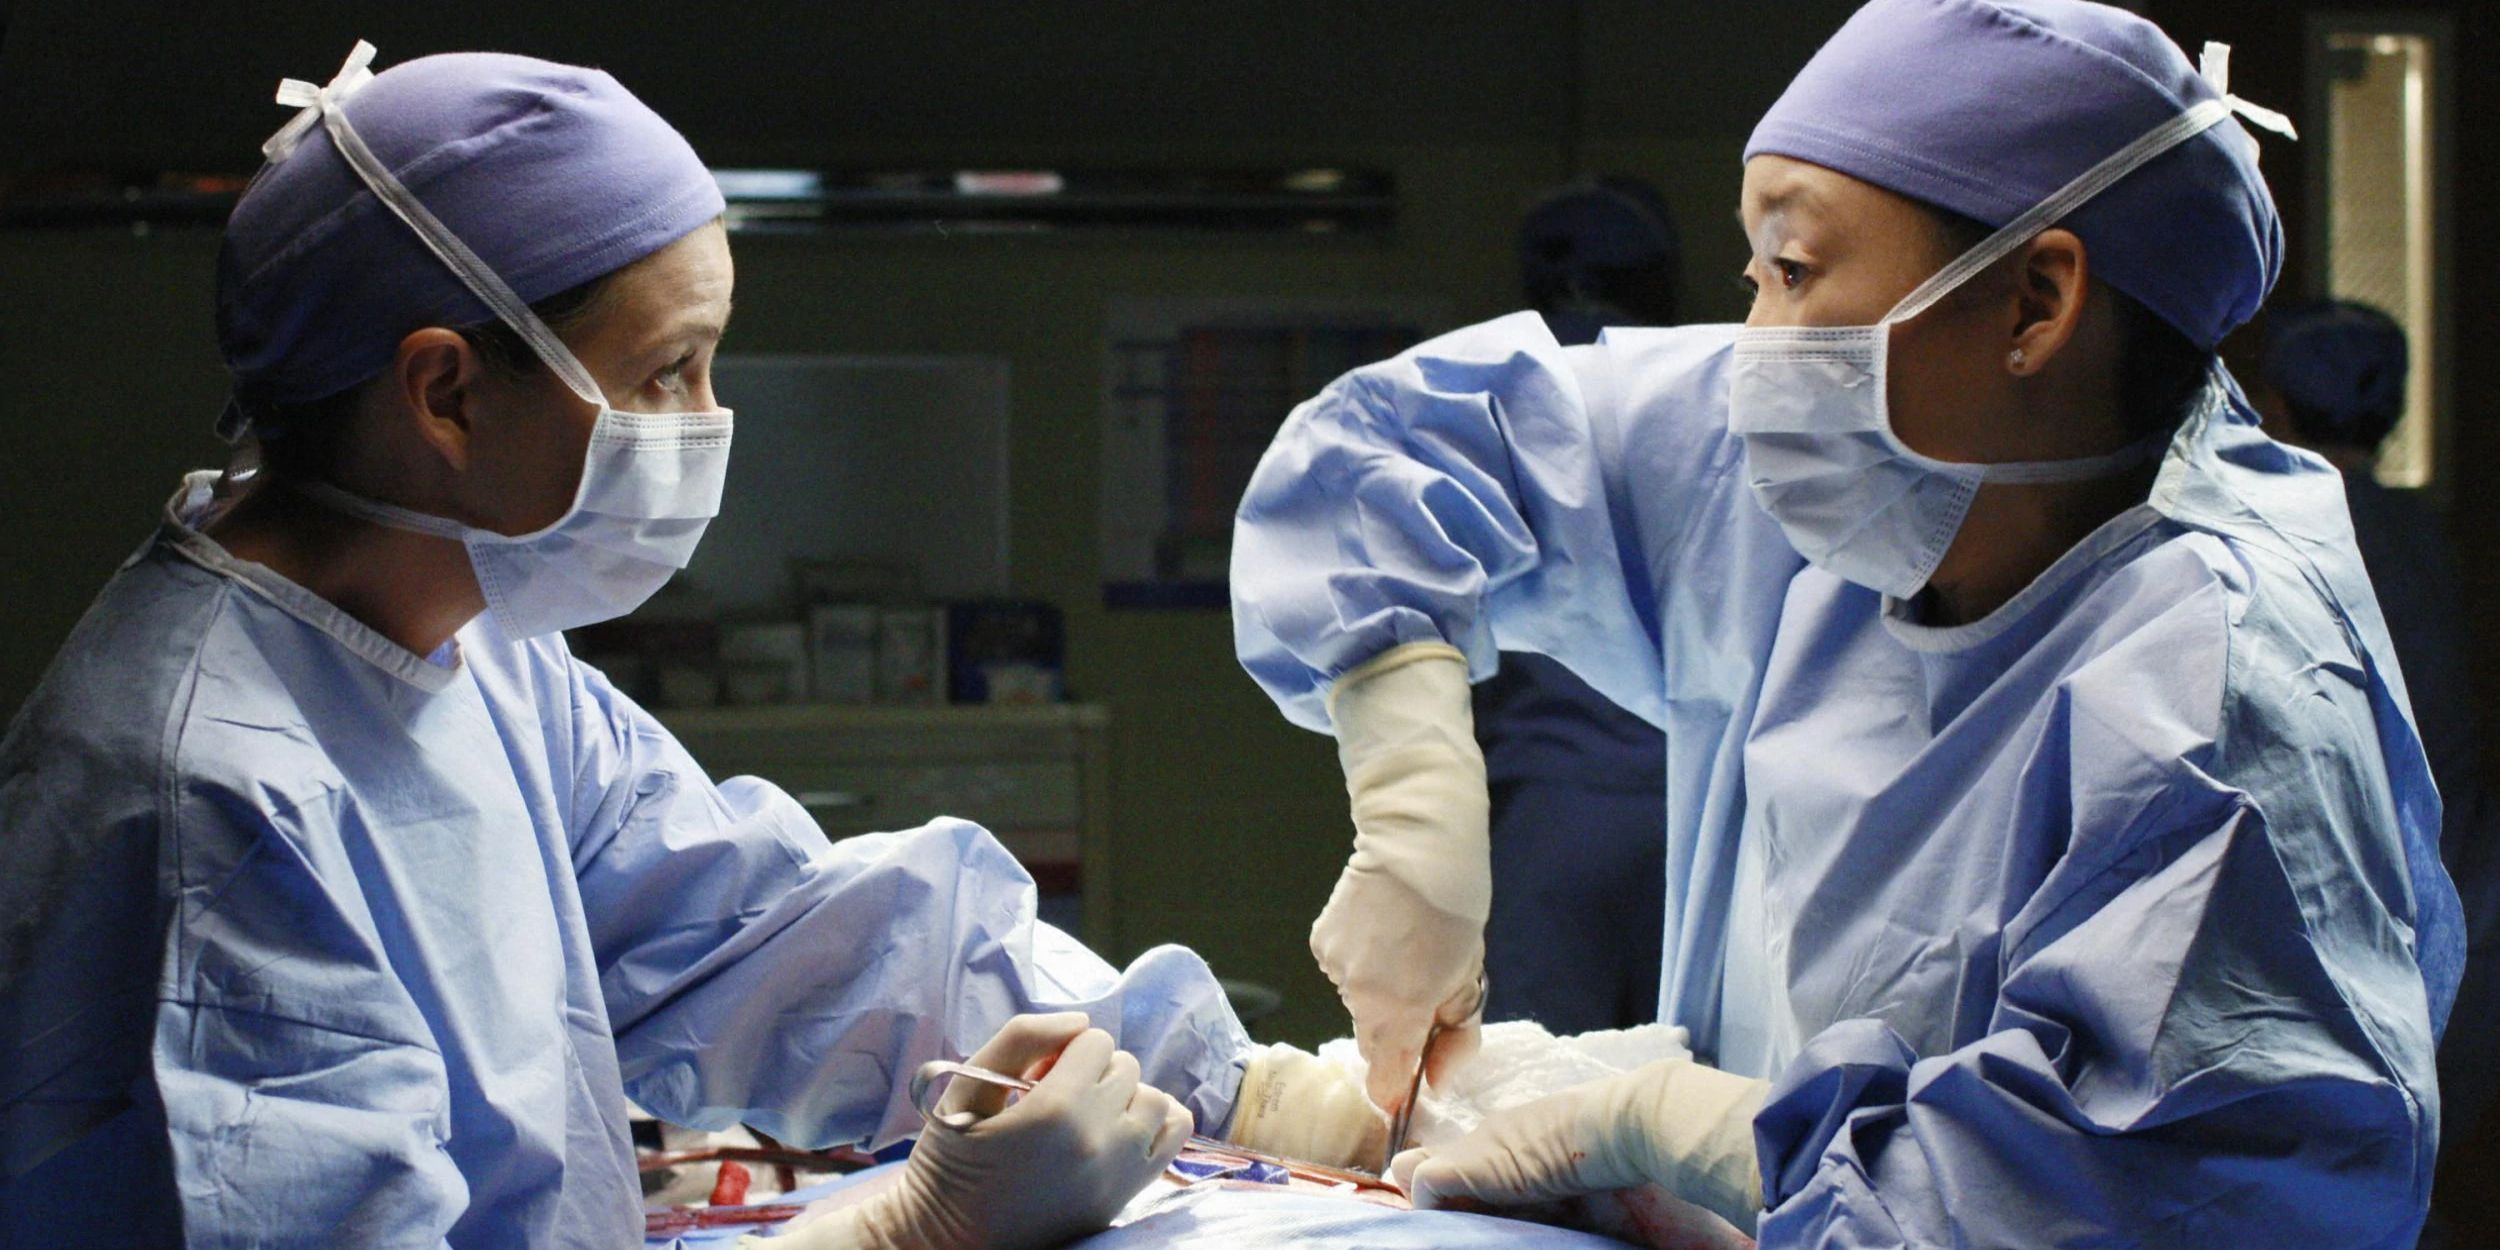 Cristina operates on a patient as Meredith watches in Grey's Anatomy.